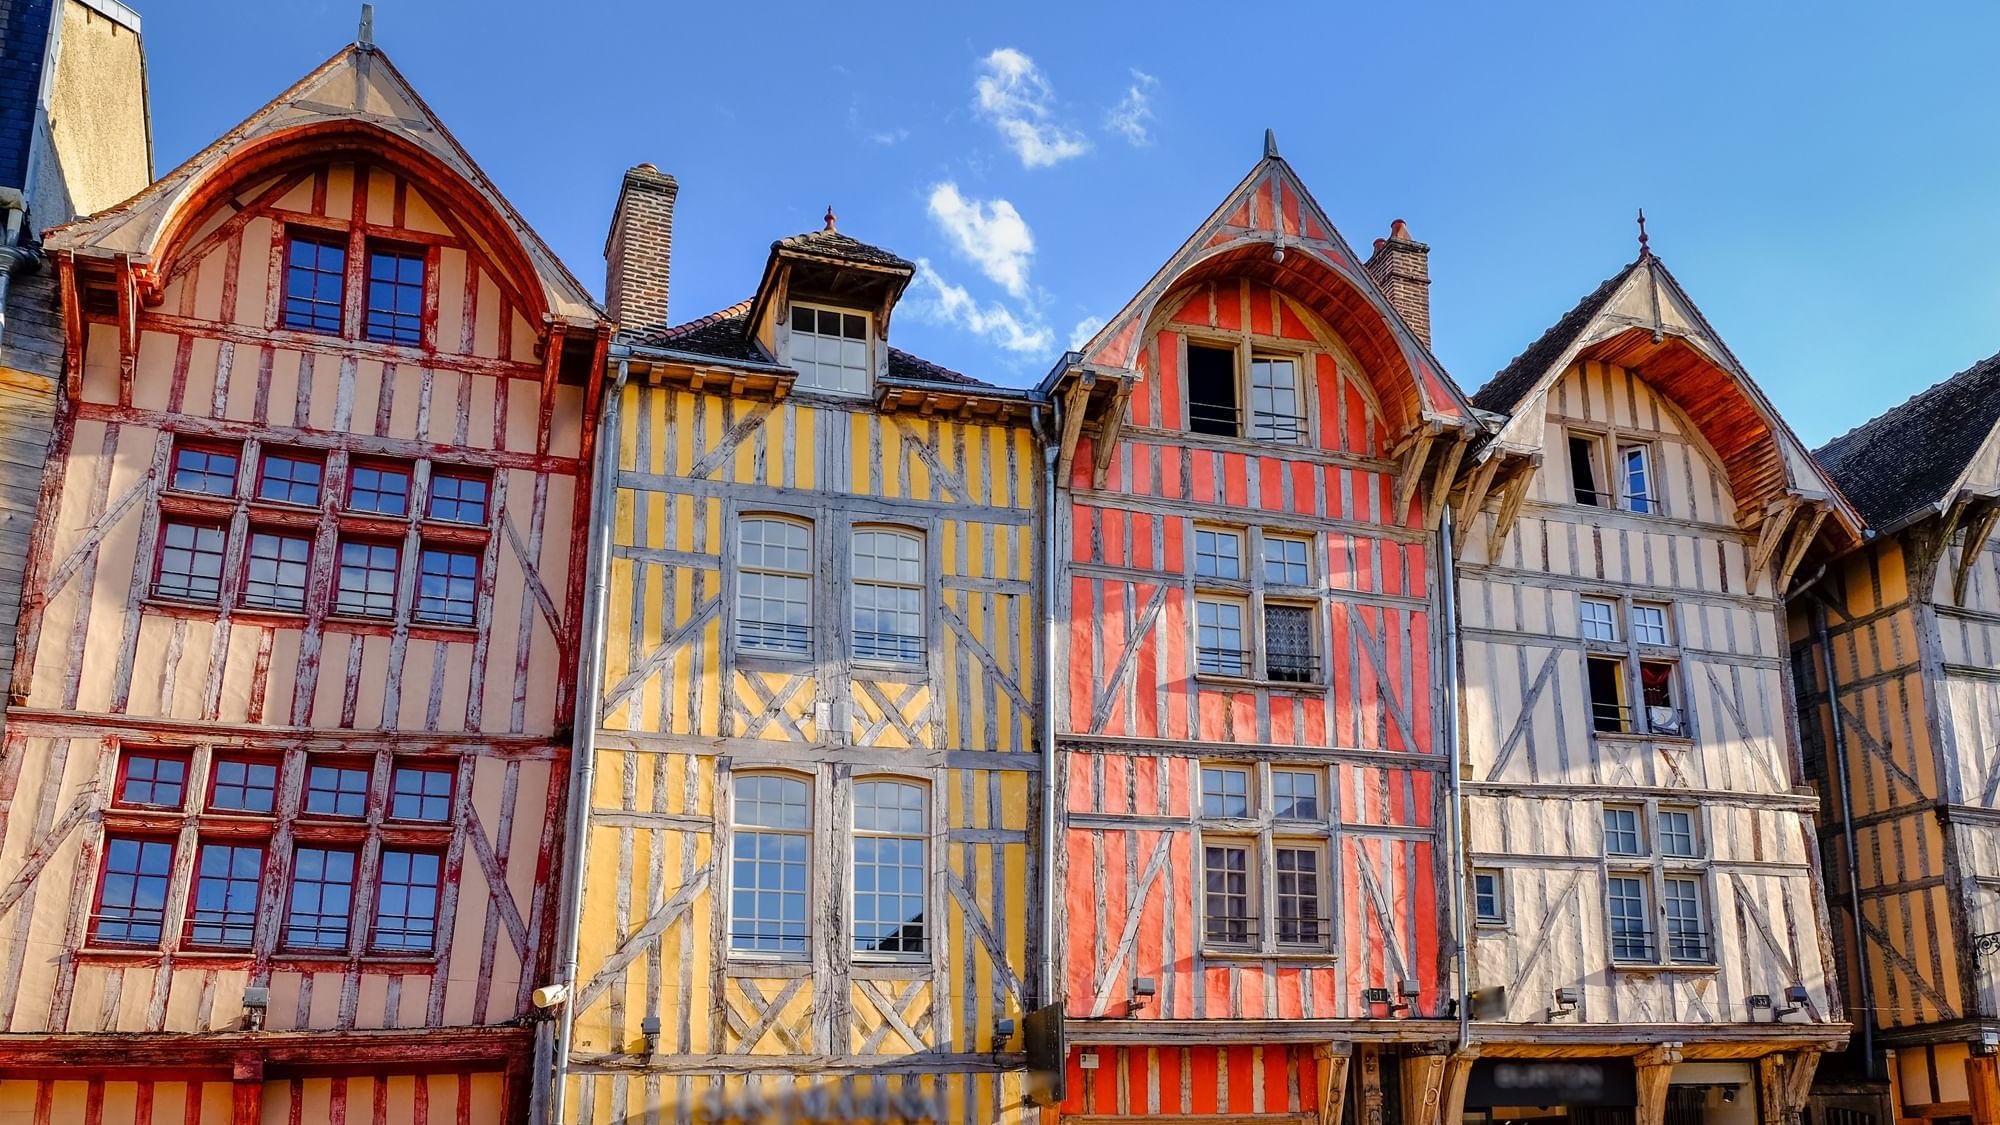 View of The old half-timbered houses near Originals Hotels